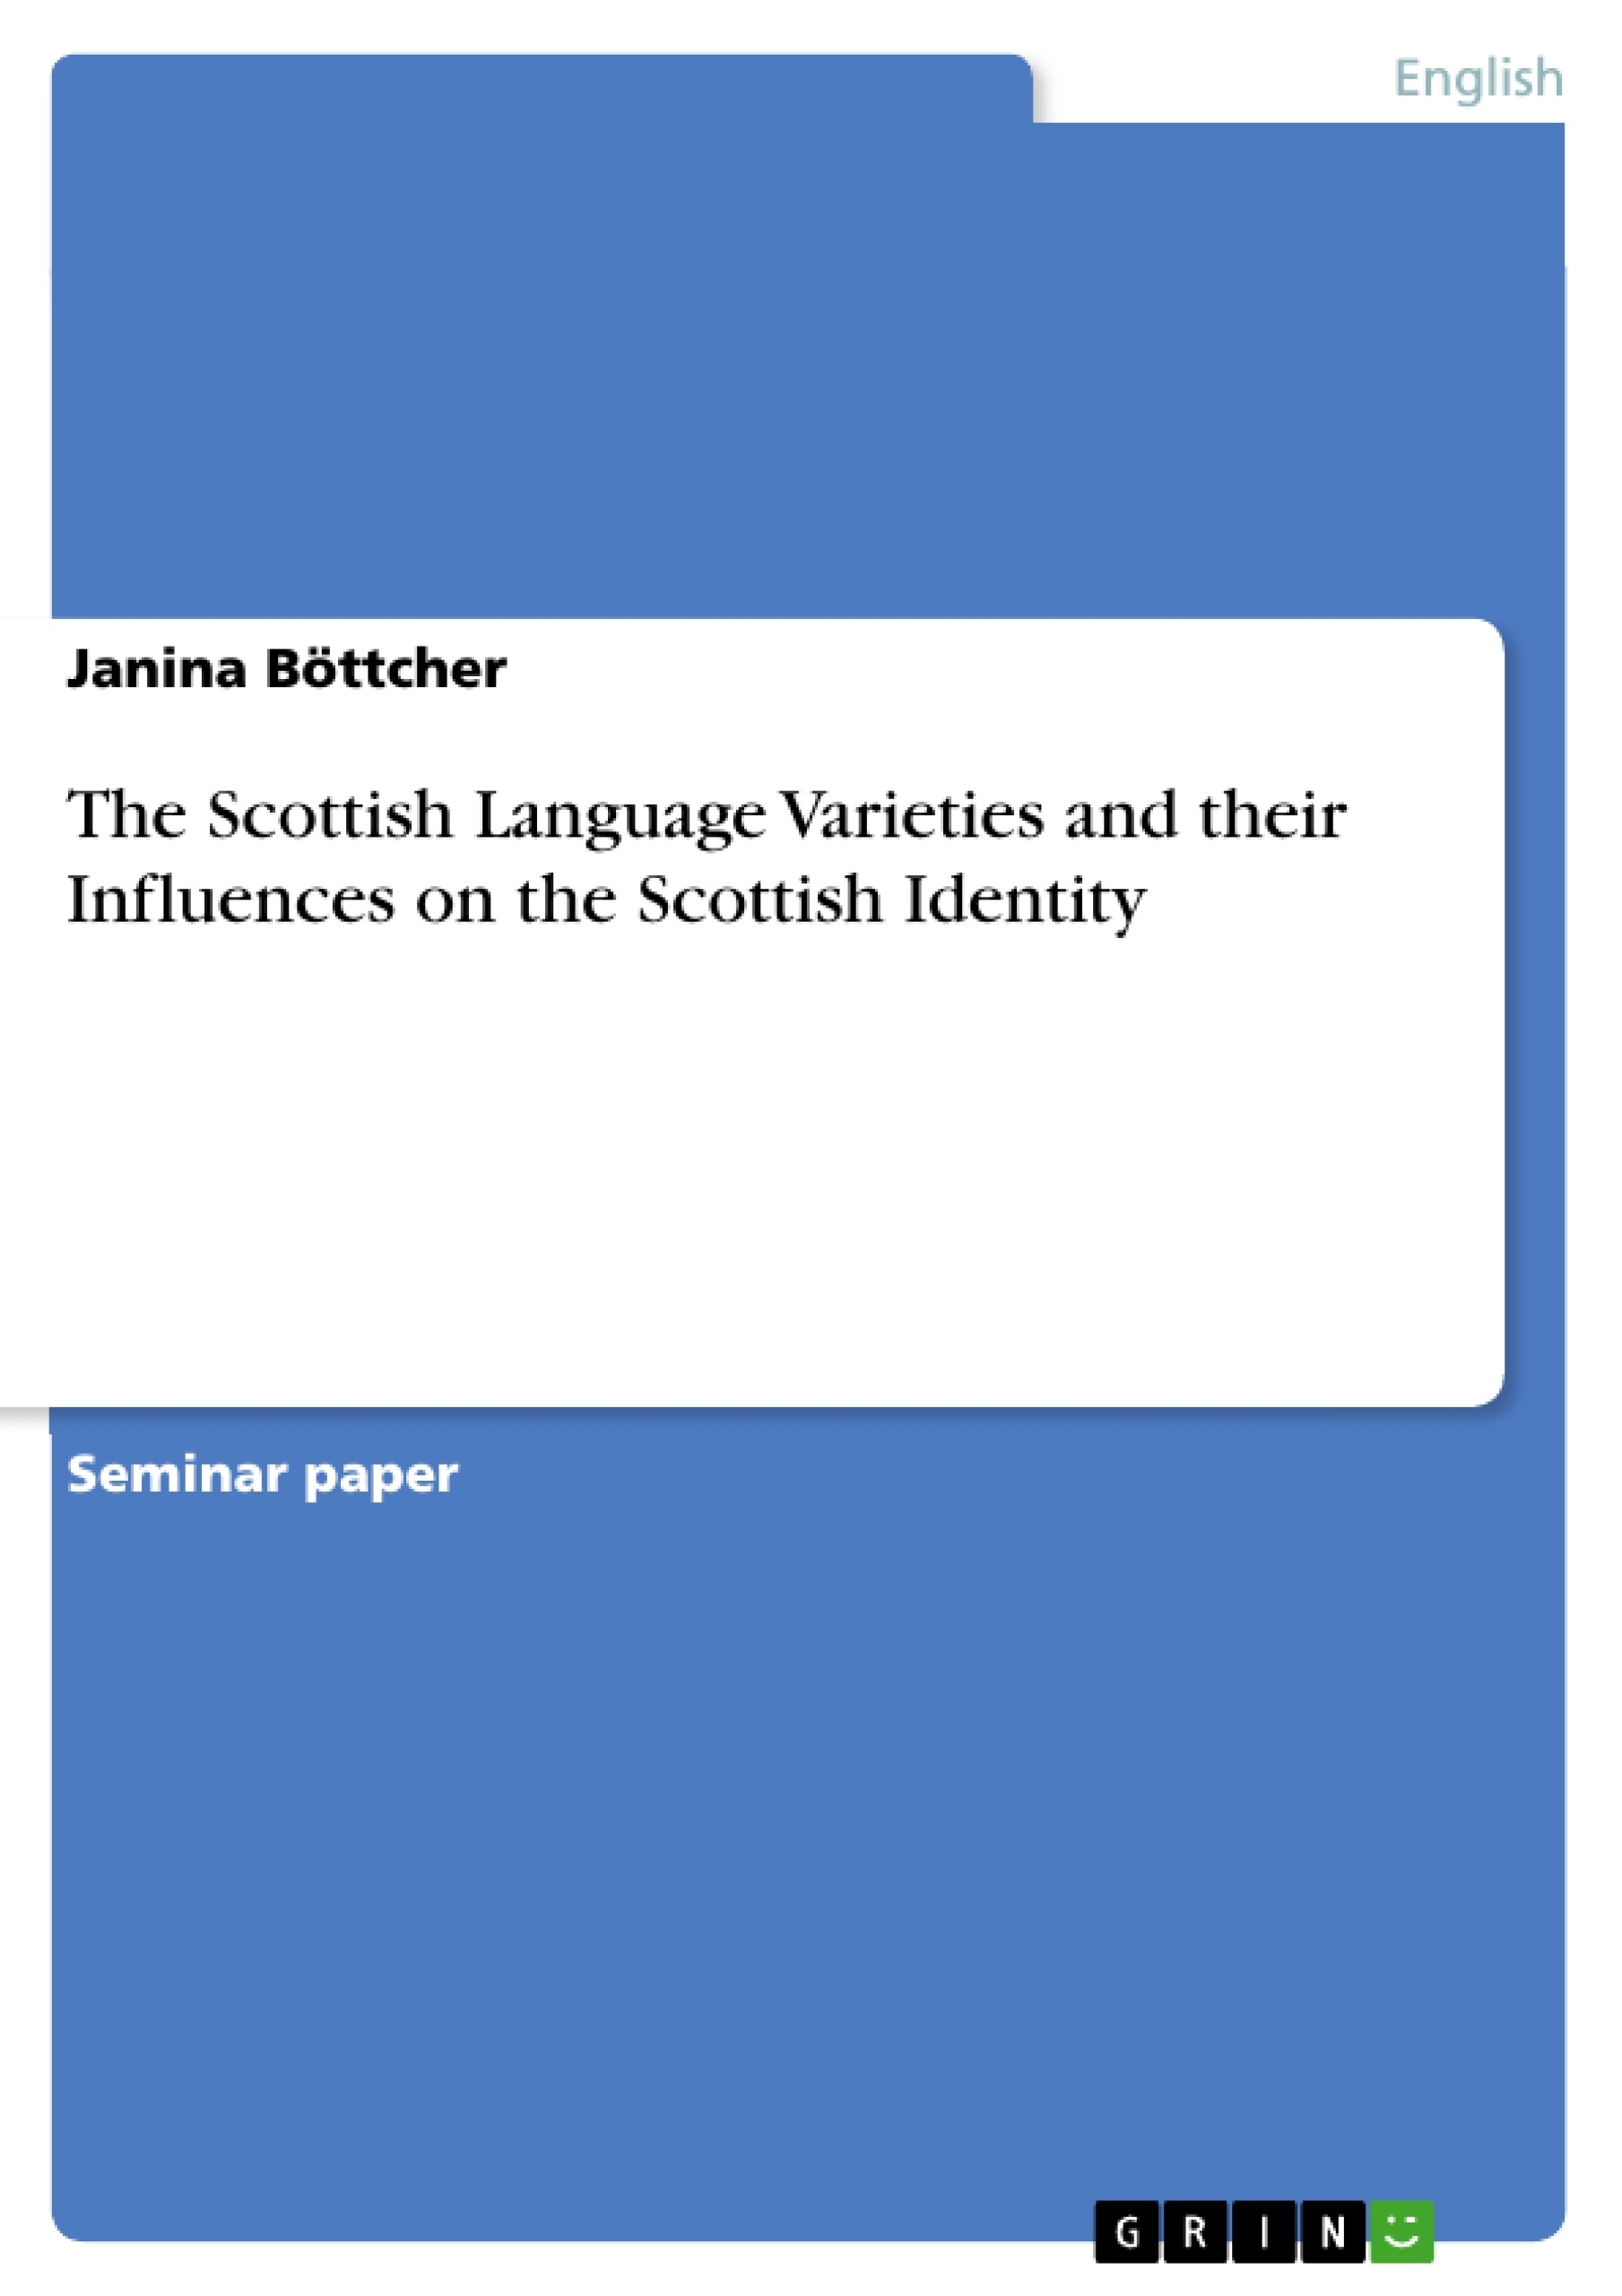 Título: The Scottish Language Varieties and their Influences on the Scottish Identity